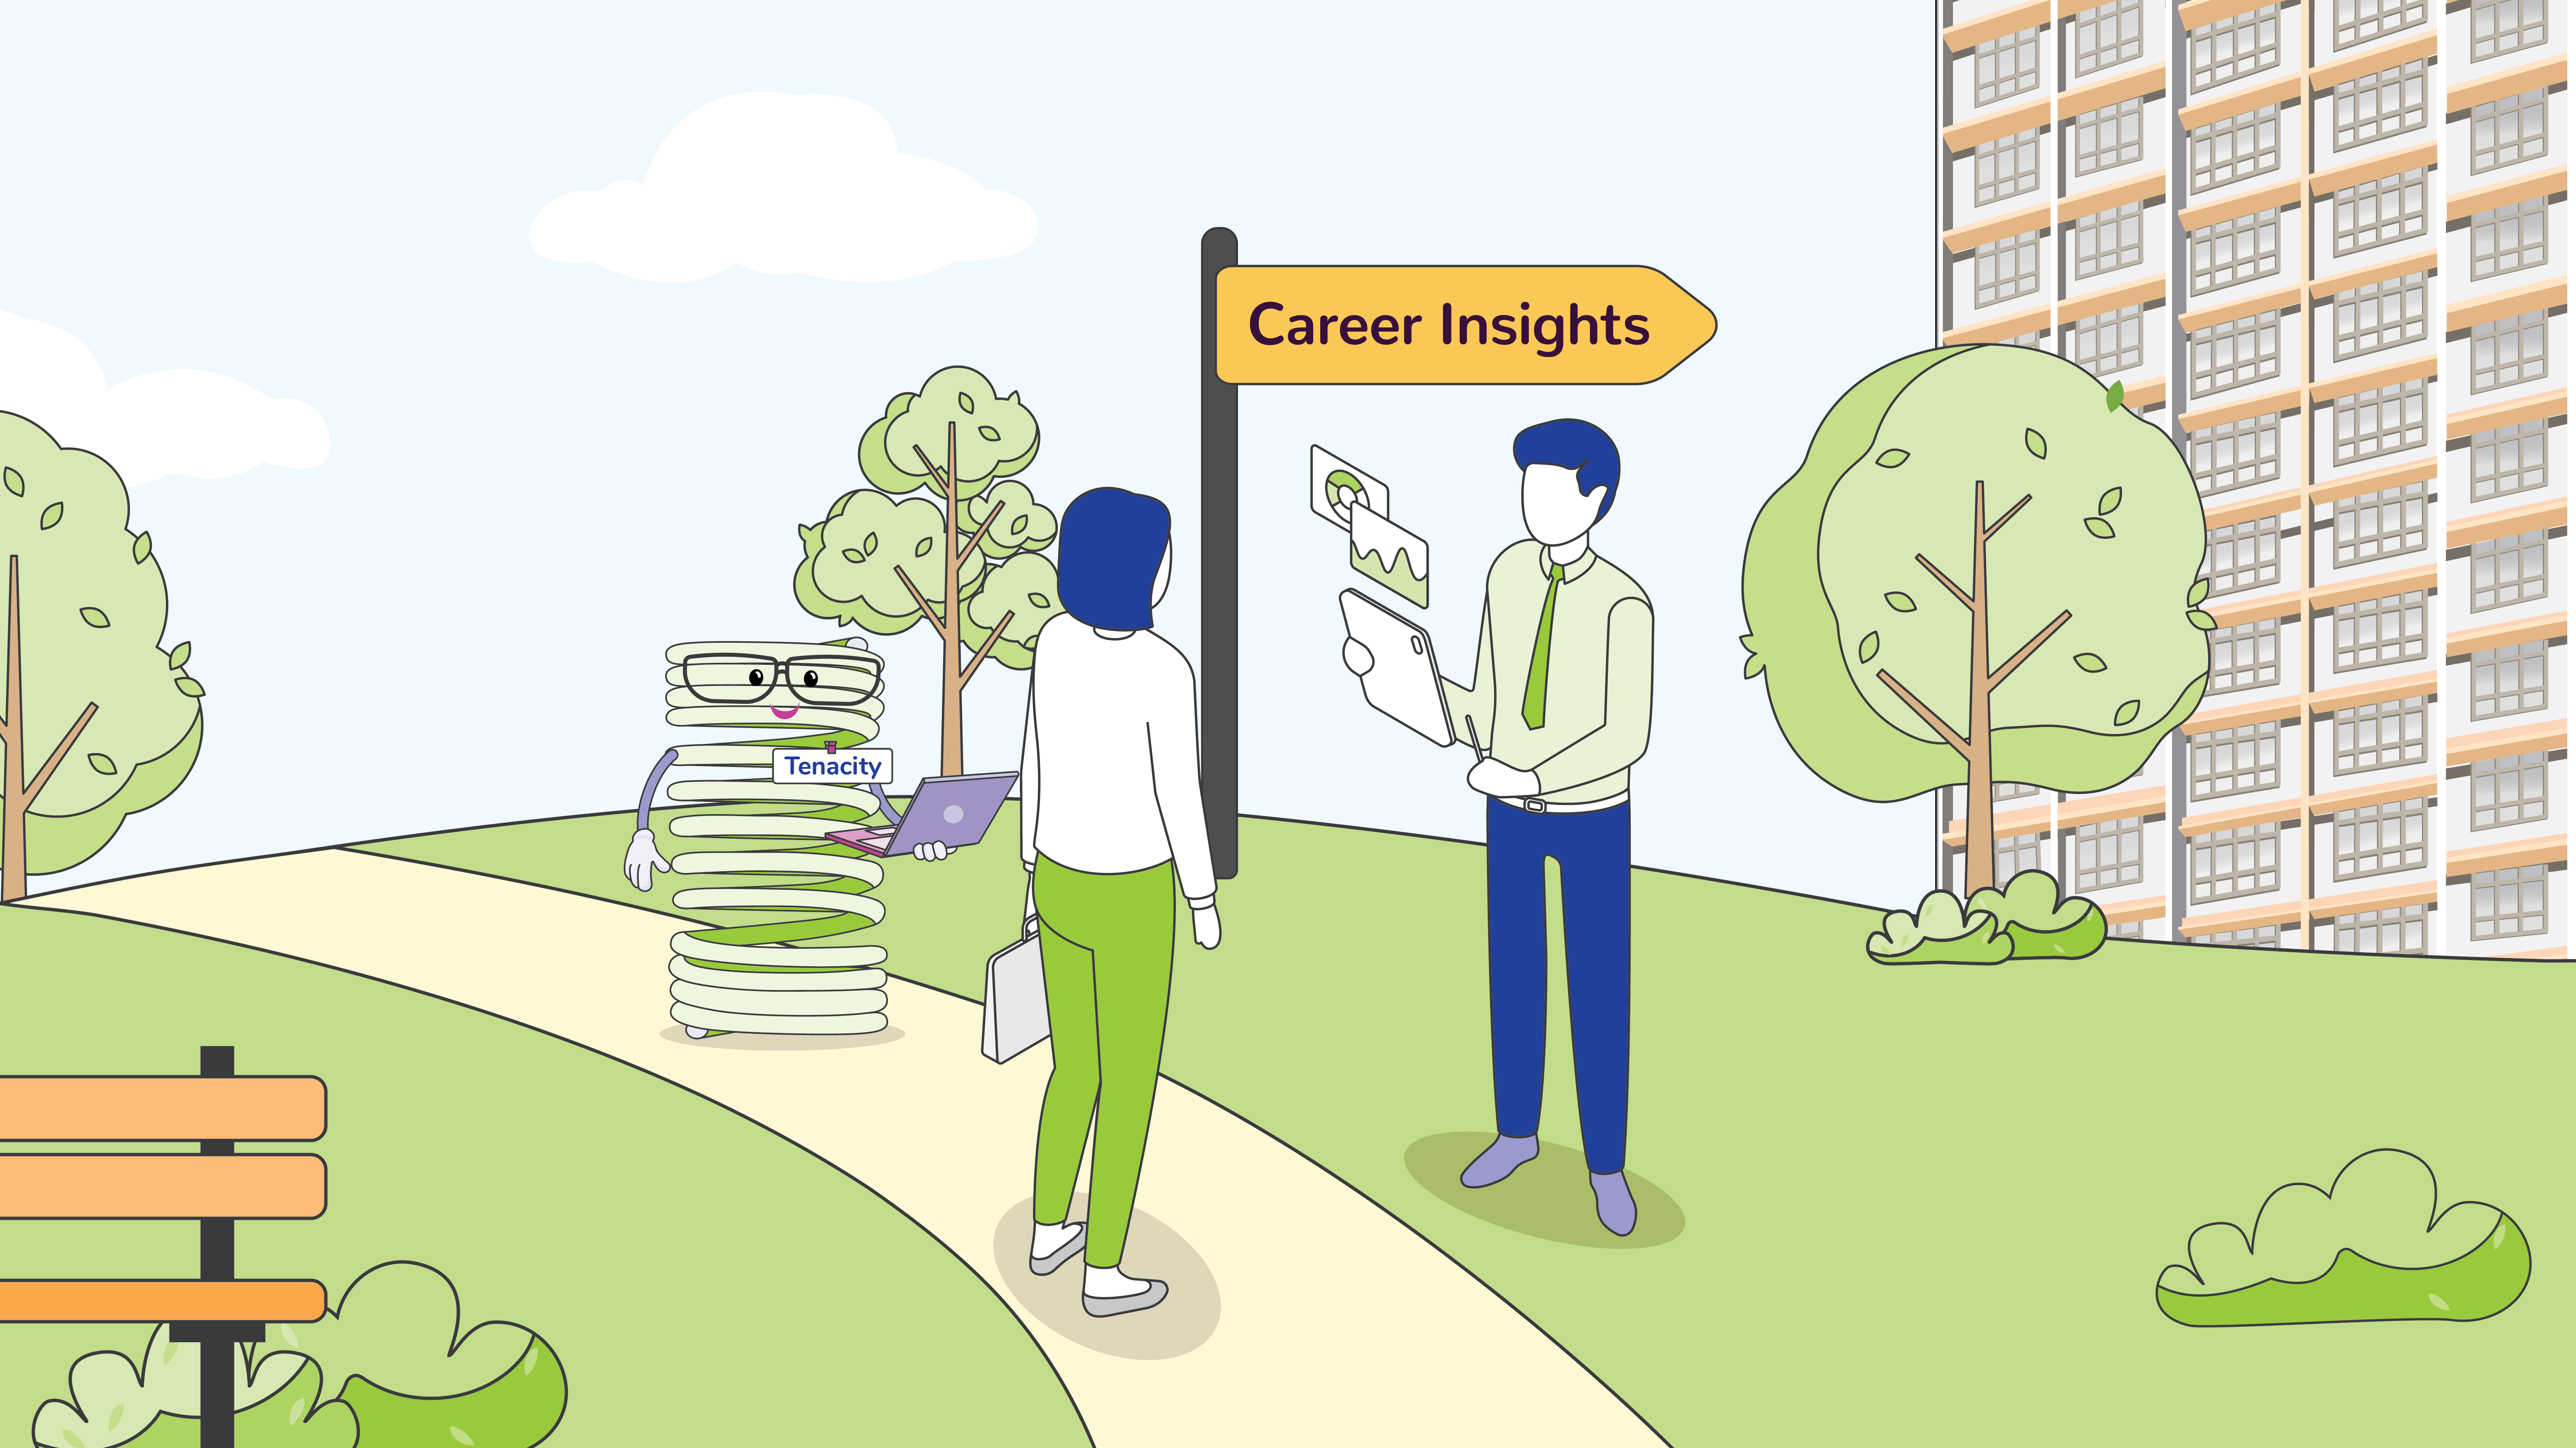 Illustration showing an individual seeking career insights from an employer.